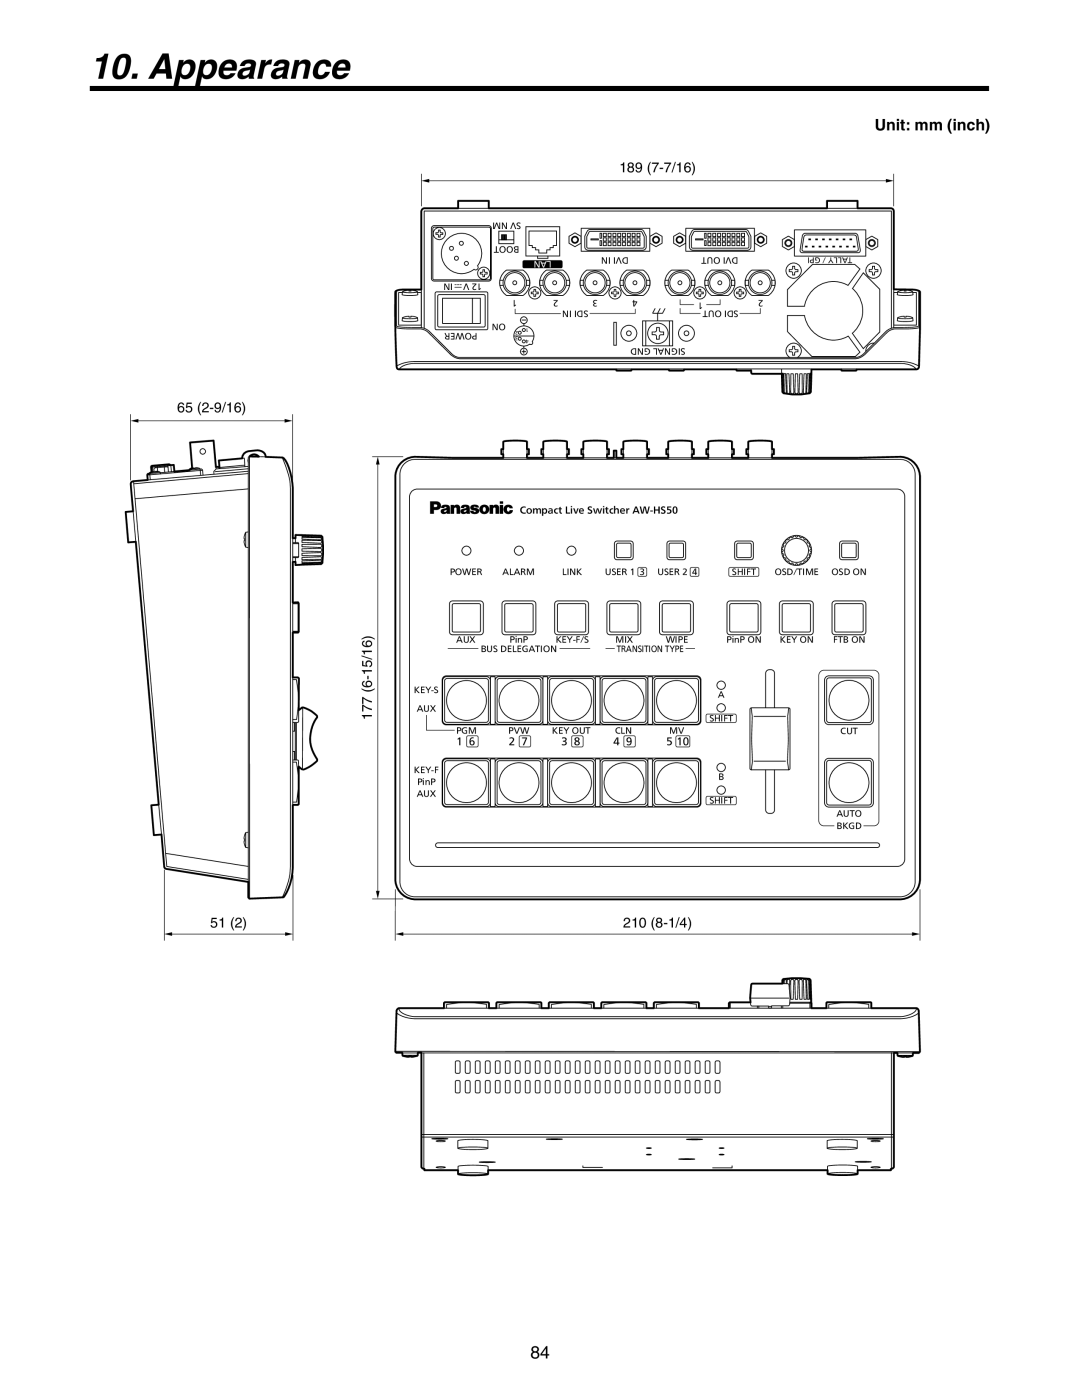 Panasonic AW-HS50N operating instructions Appearance, Unit: mm inch 